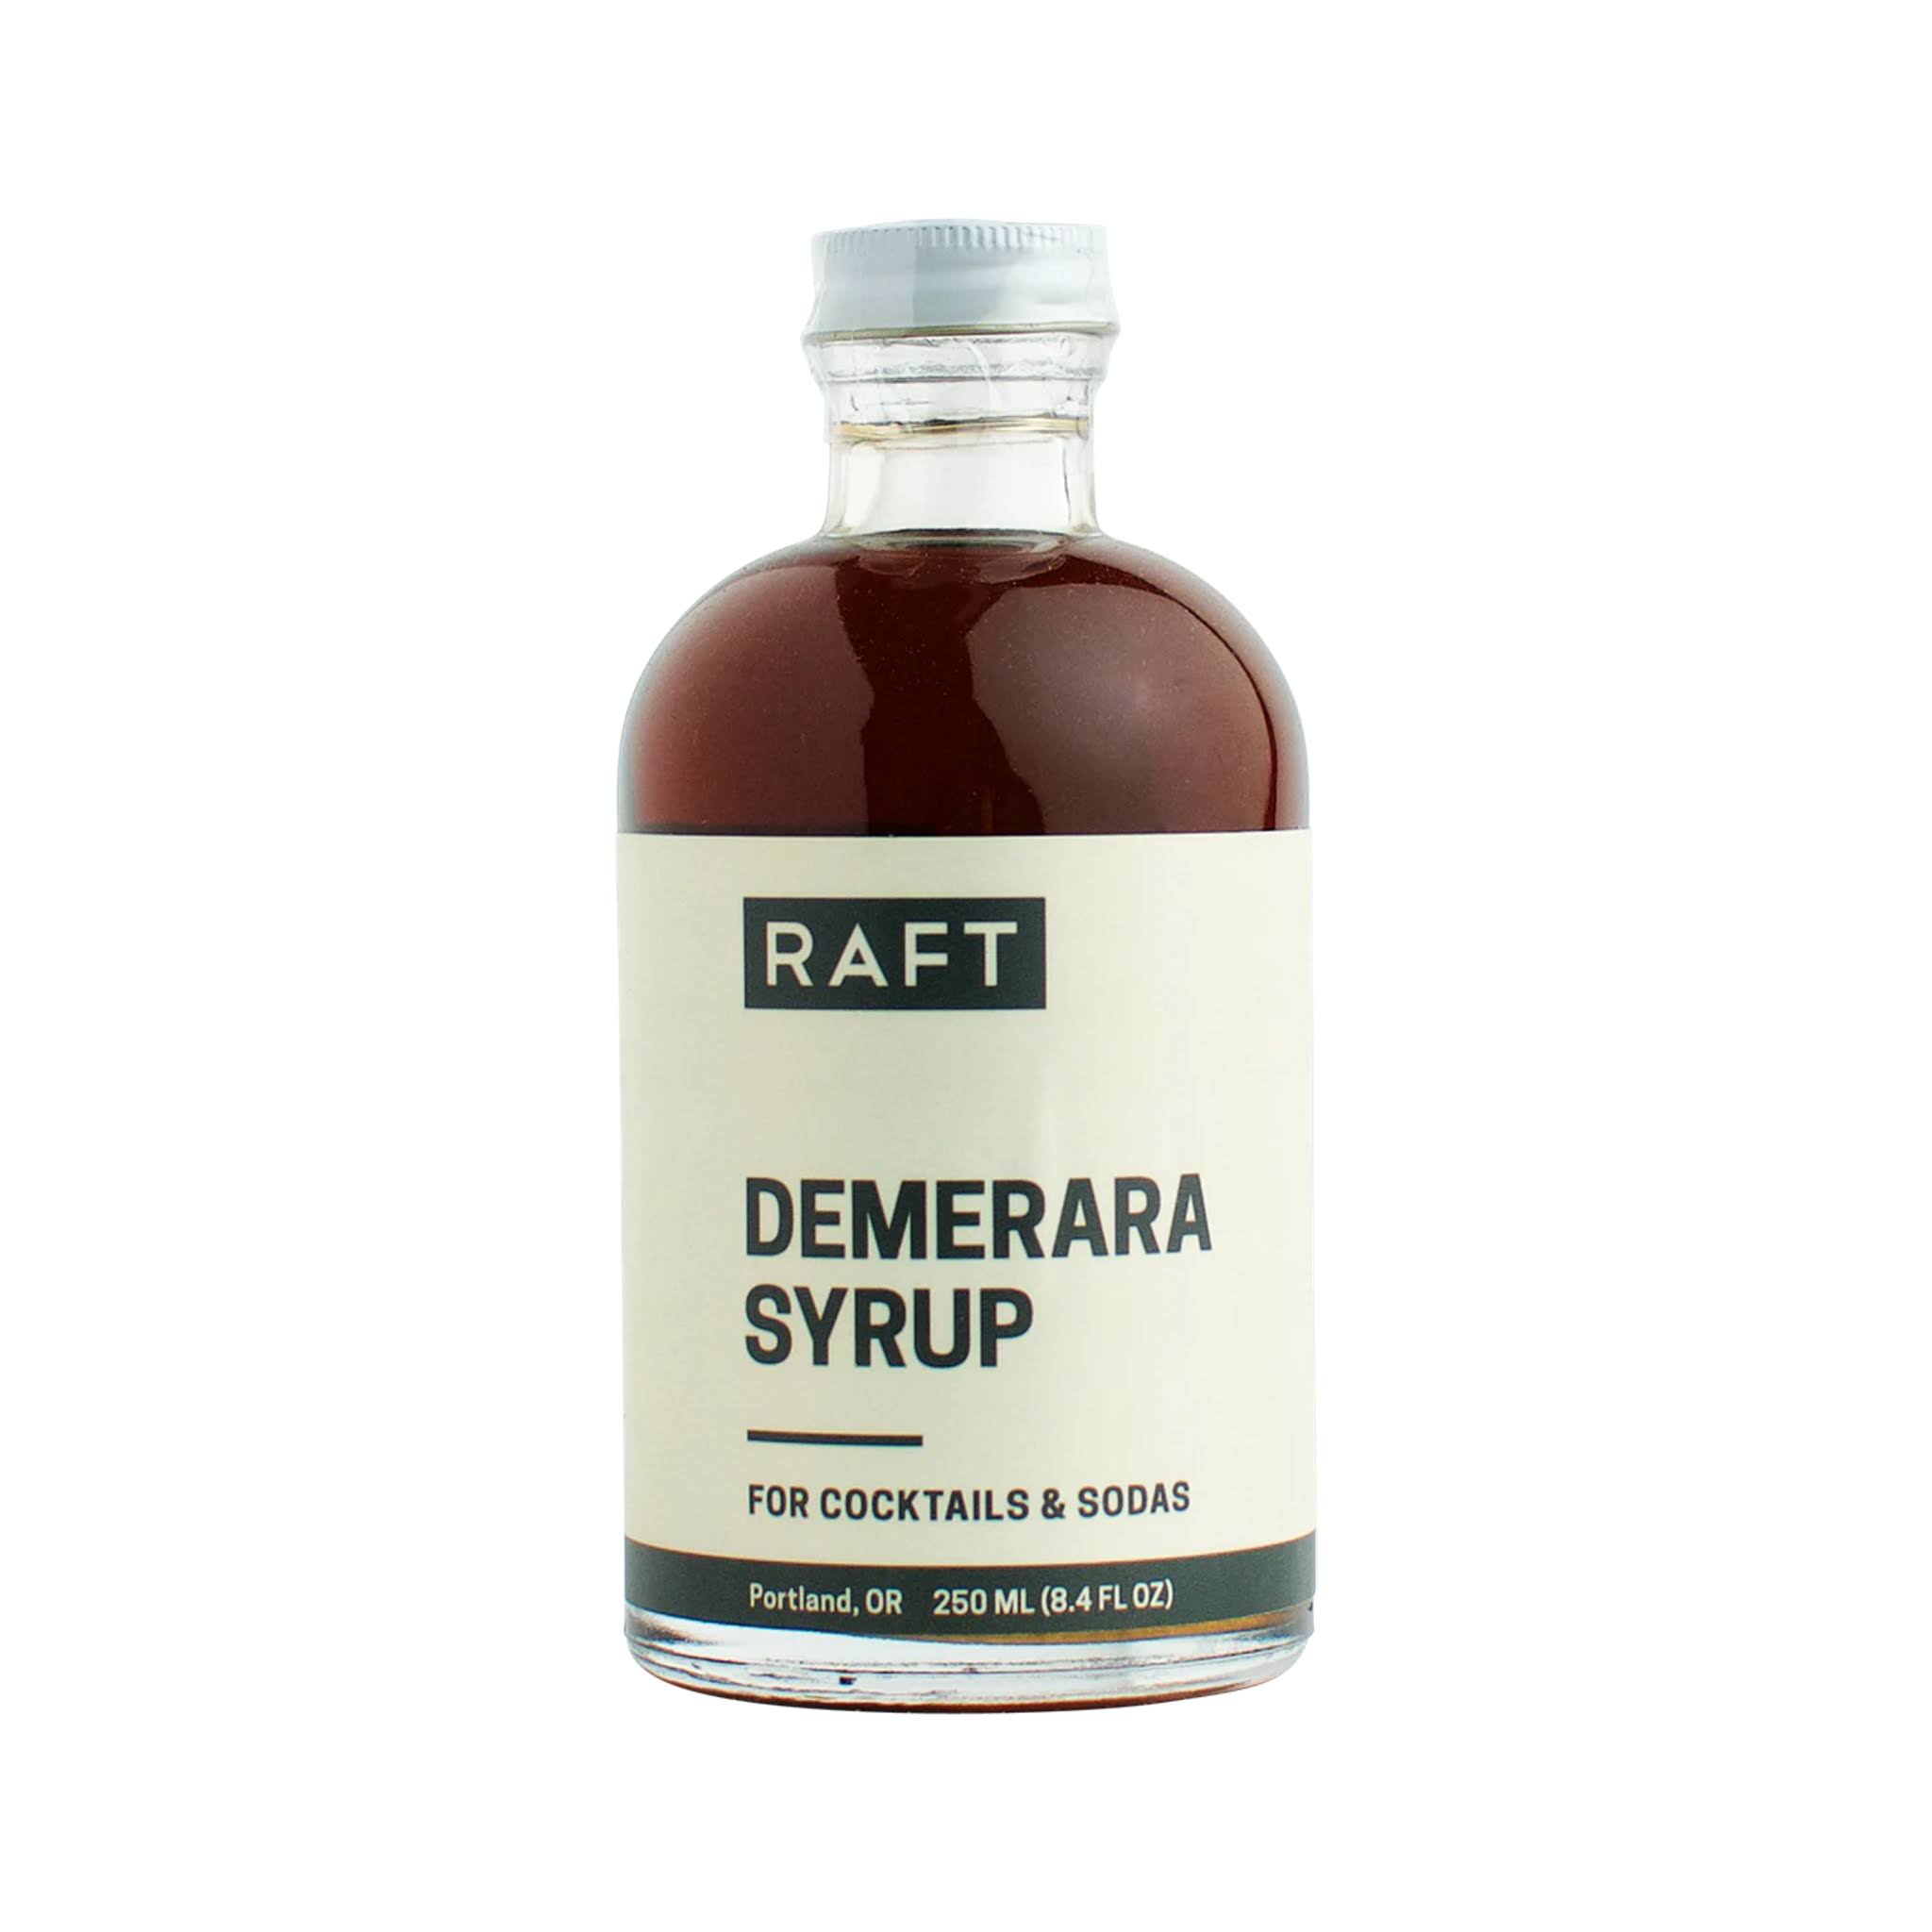 Raft Demerara Syrup For Cocktails and Sodas, 250ml